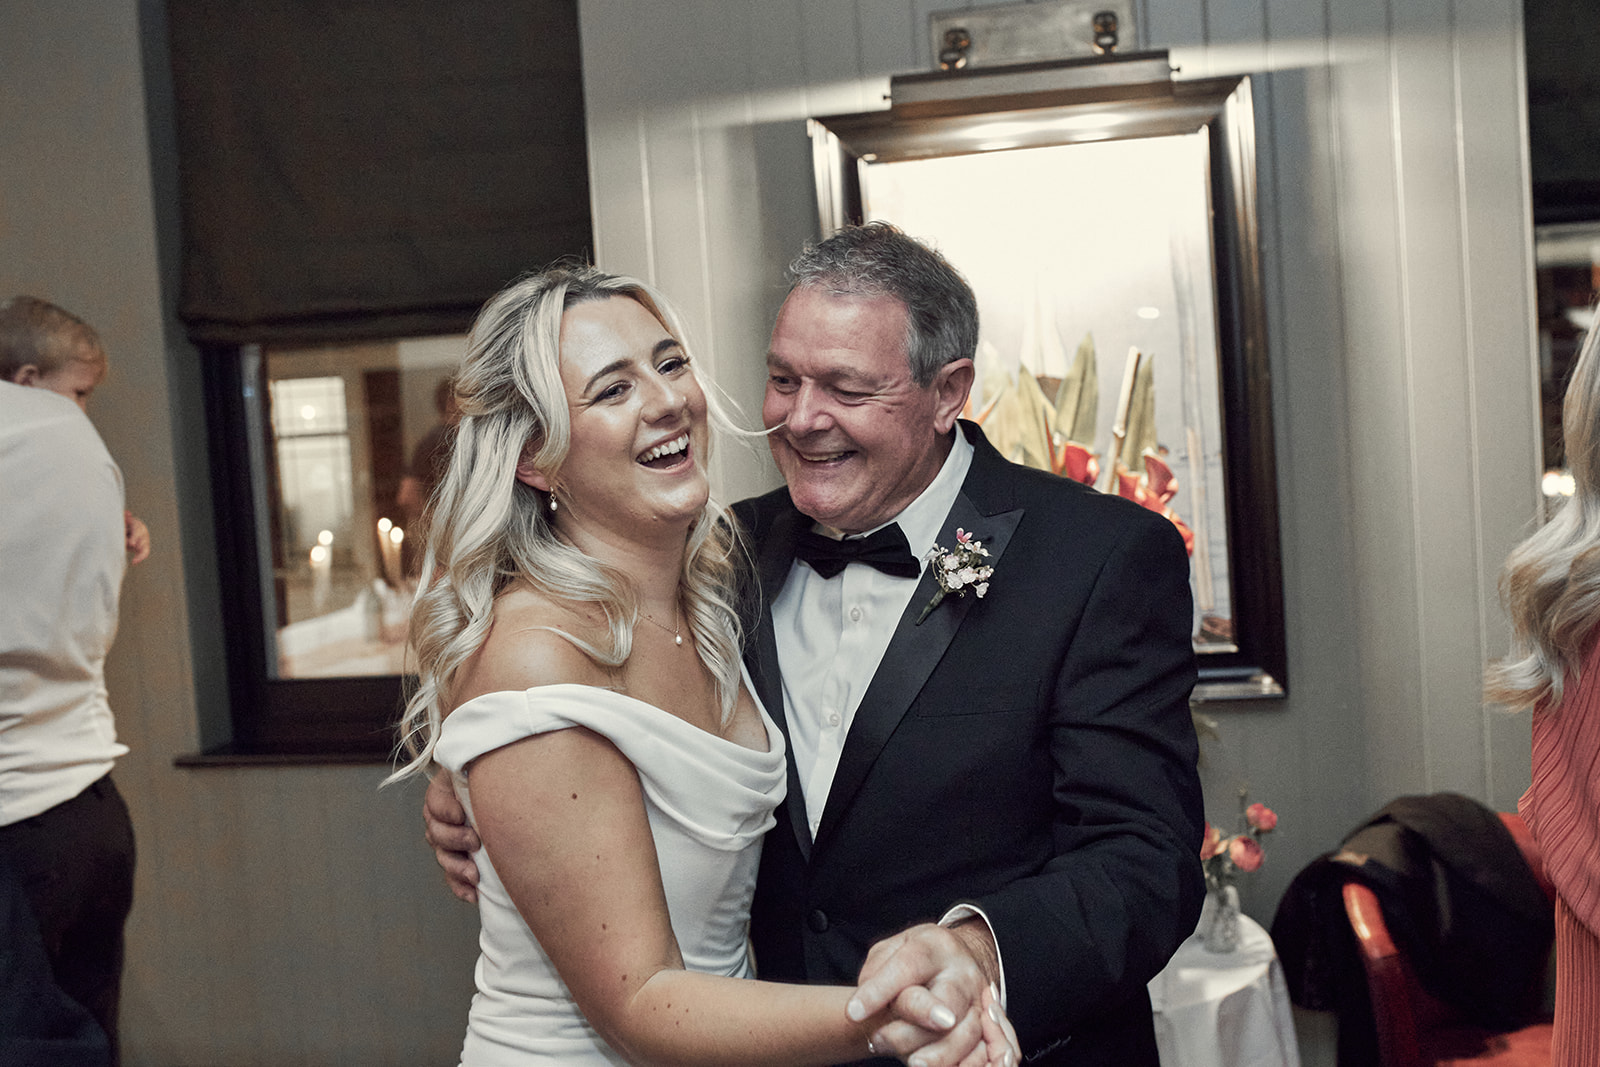 sweet candid portrait of Katy and her father dancing at the wedding reception  at Beaufort House